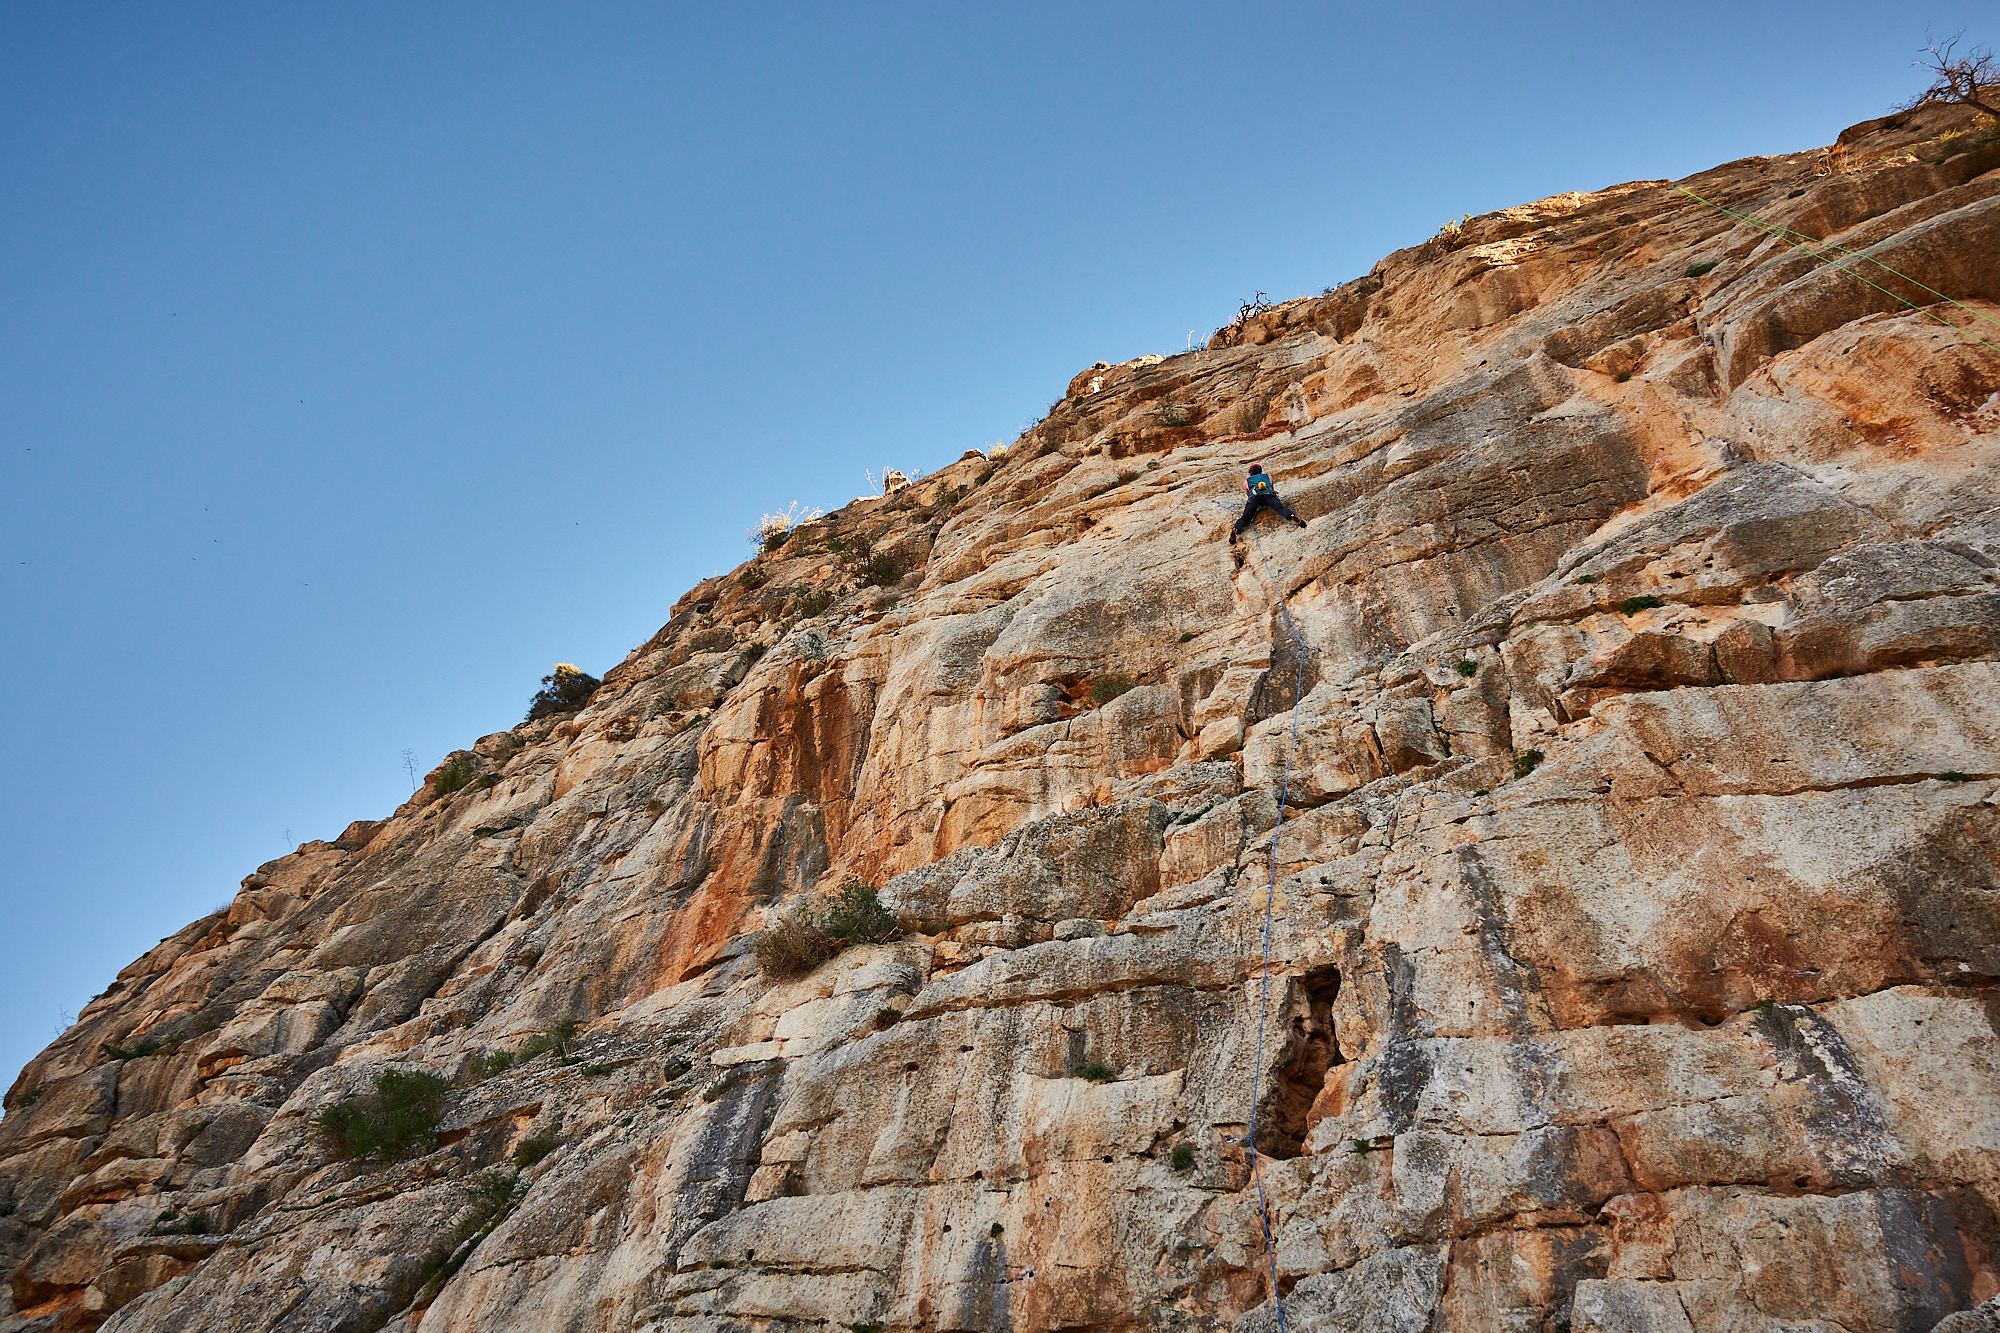 A climber sport climbing on a grey and orange limestone cliff in southern Spain with blue sky above